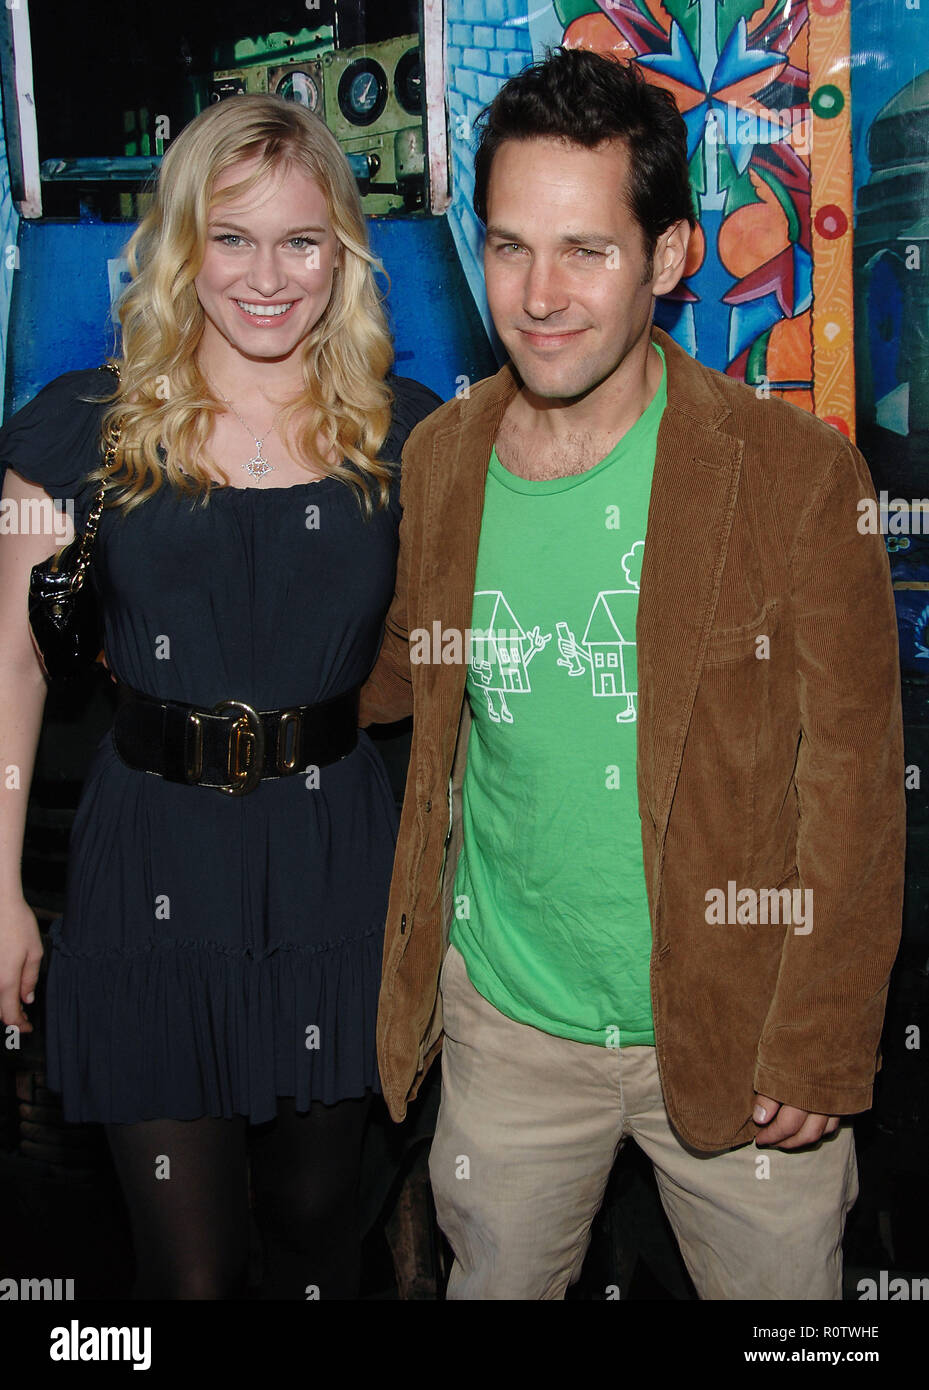 Leven Rambin and Paul Rudd arriving at The Darjeeling Limited Premiere at the Academy of Motion Pictures Arts & Sciences in Los Angeles.  three quarte Stock Photo